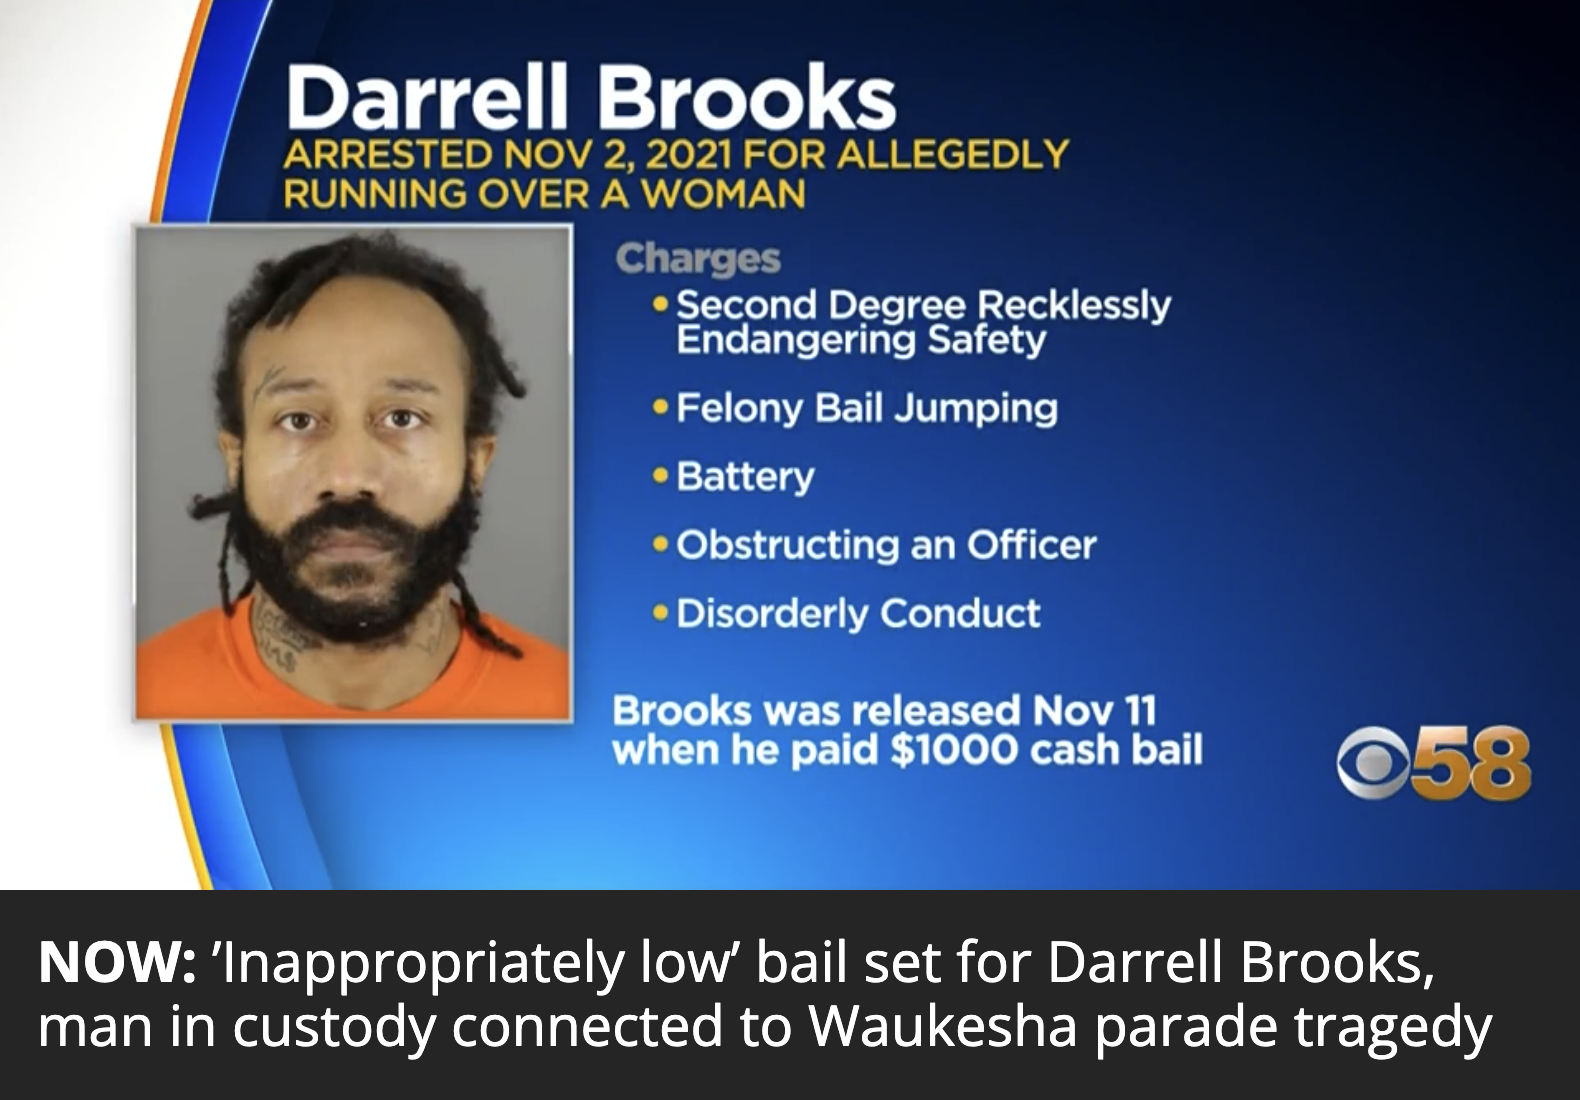 Darrell Brooks, Man In Custody Connected to Waukesha Parade Tragedy